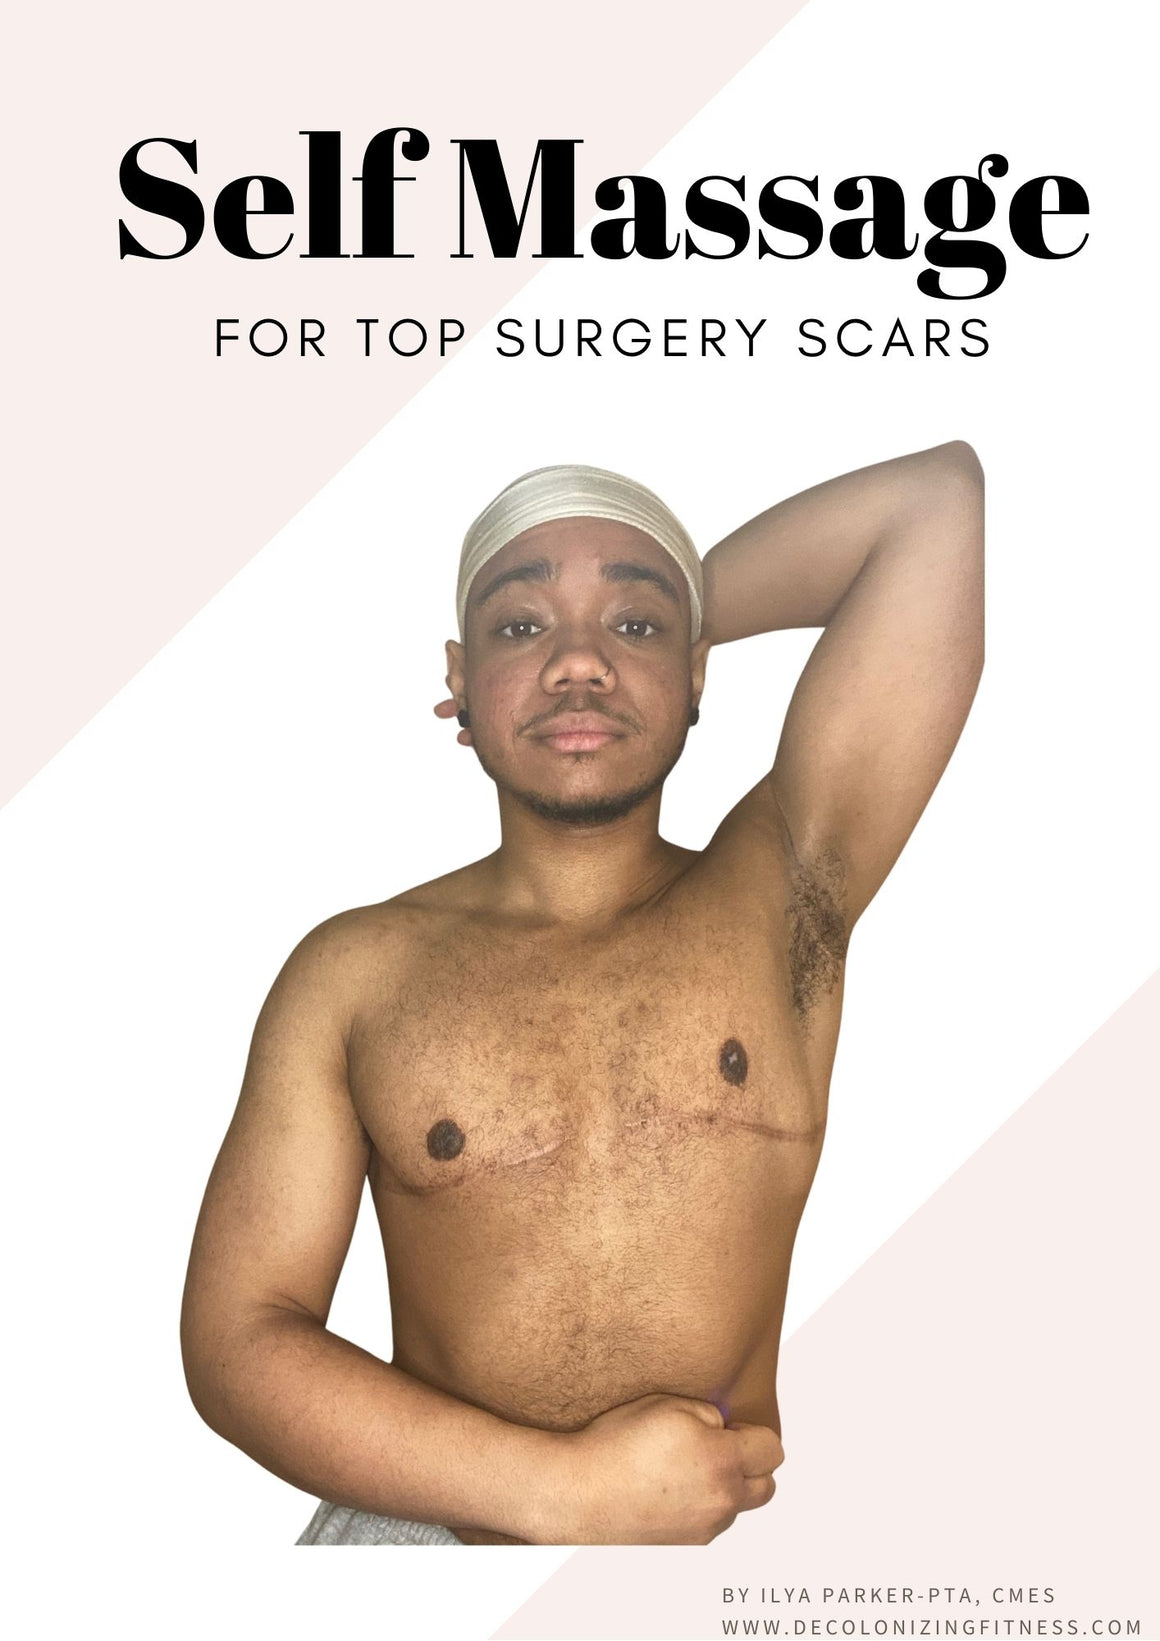 Self Massage Guide For Scar Care After Top Surgery Decolonizing Fitness